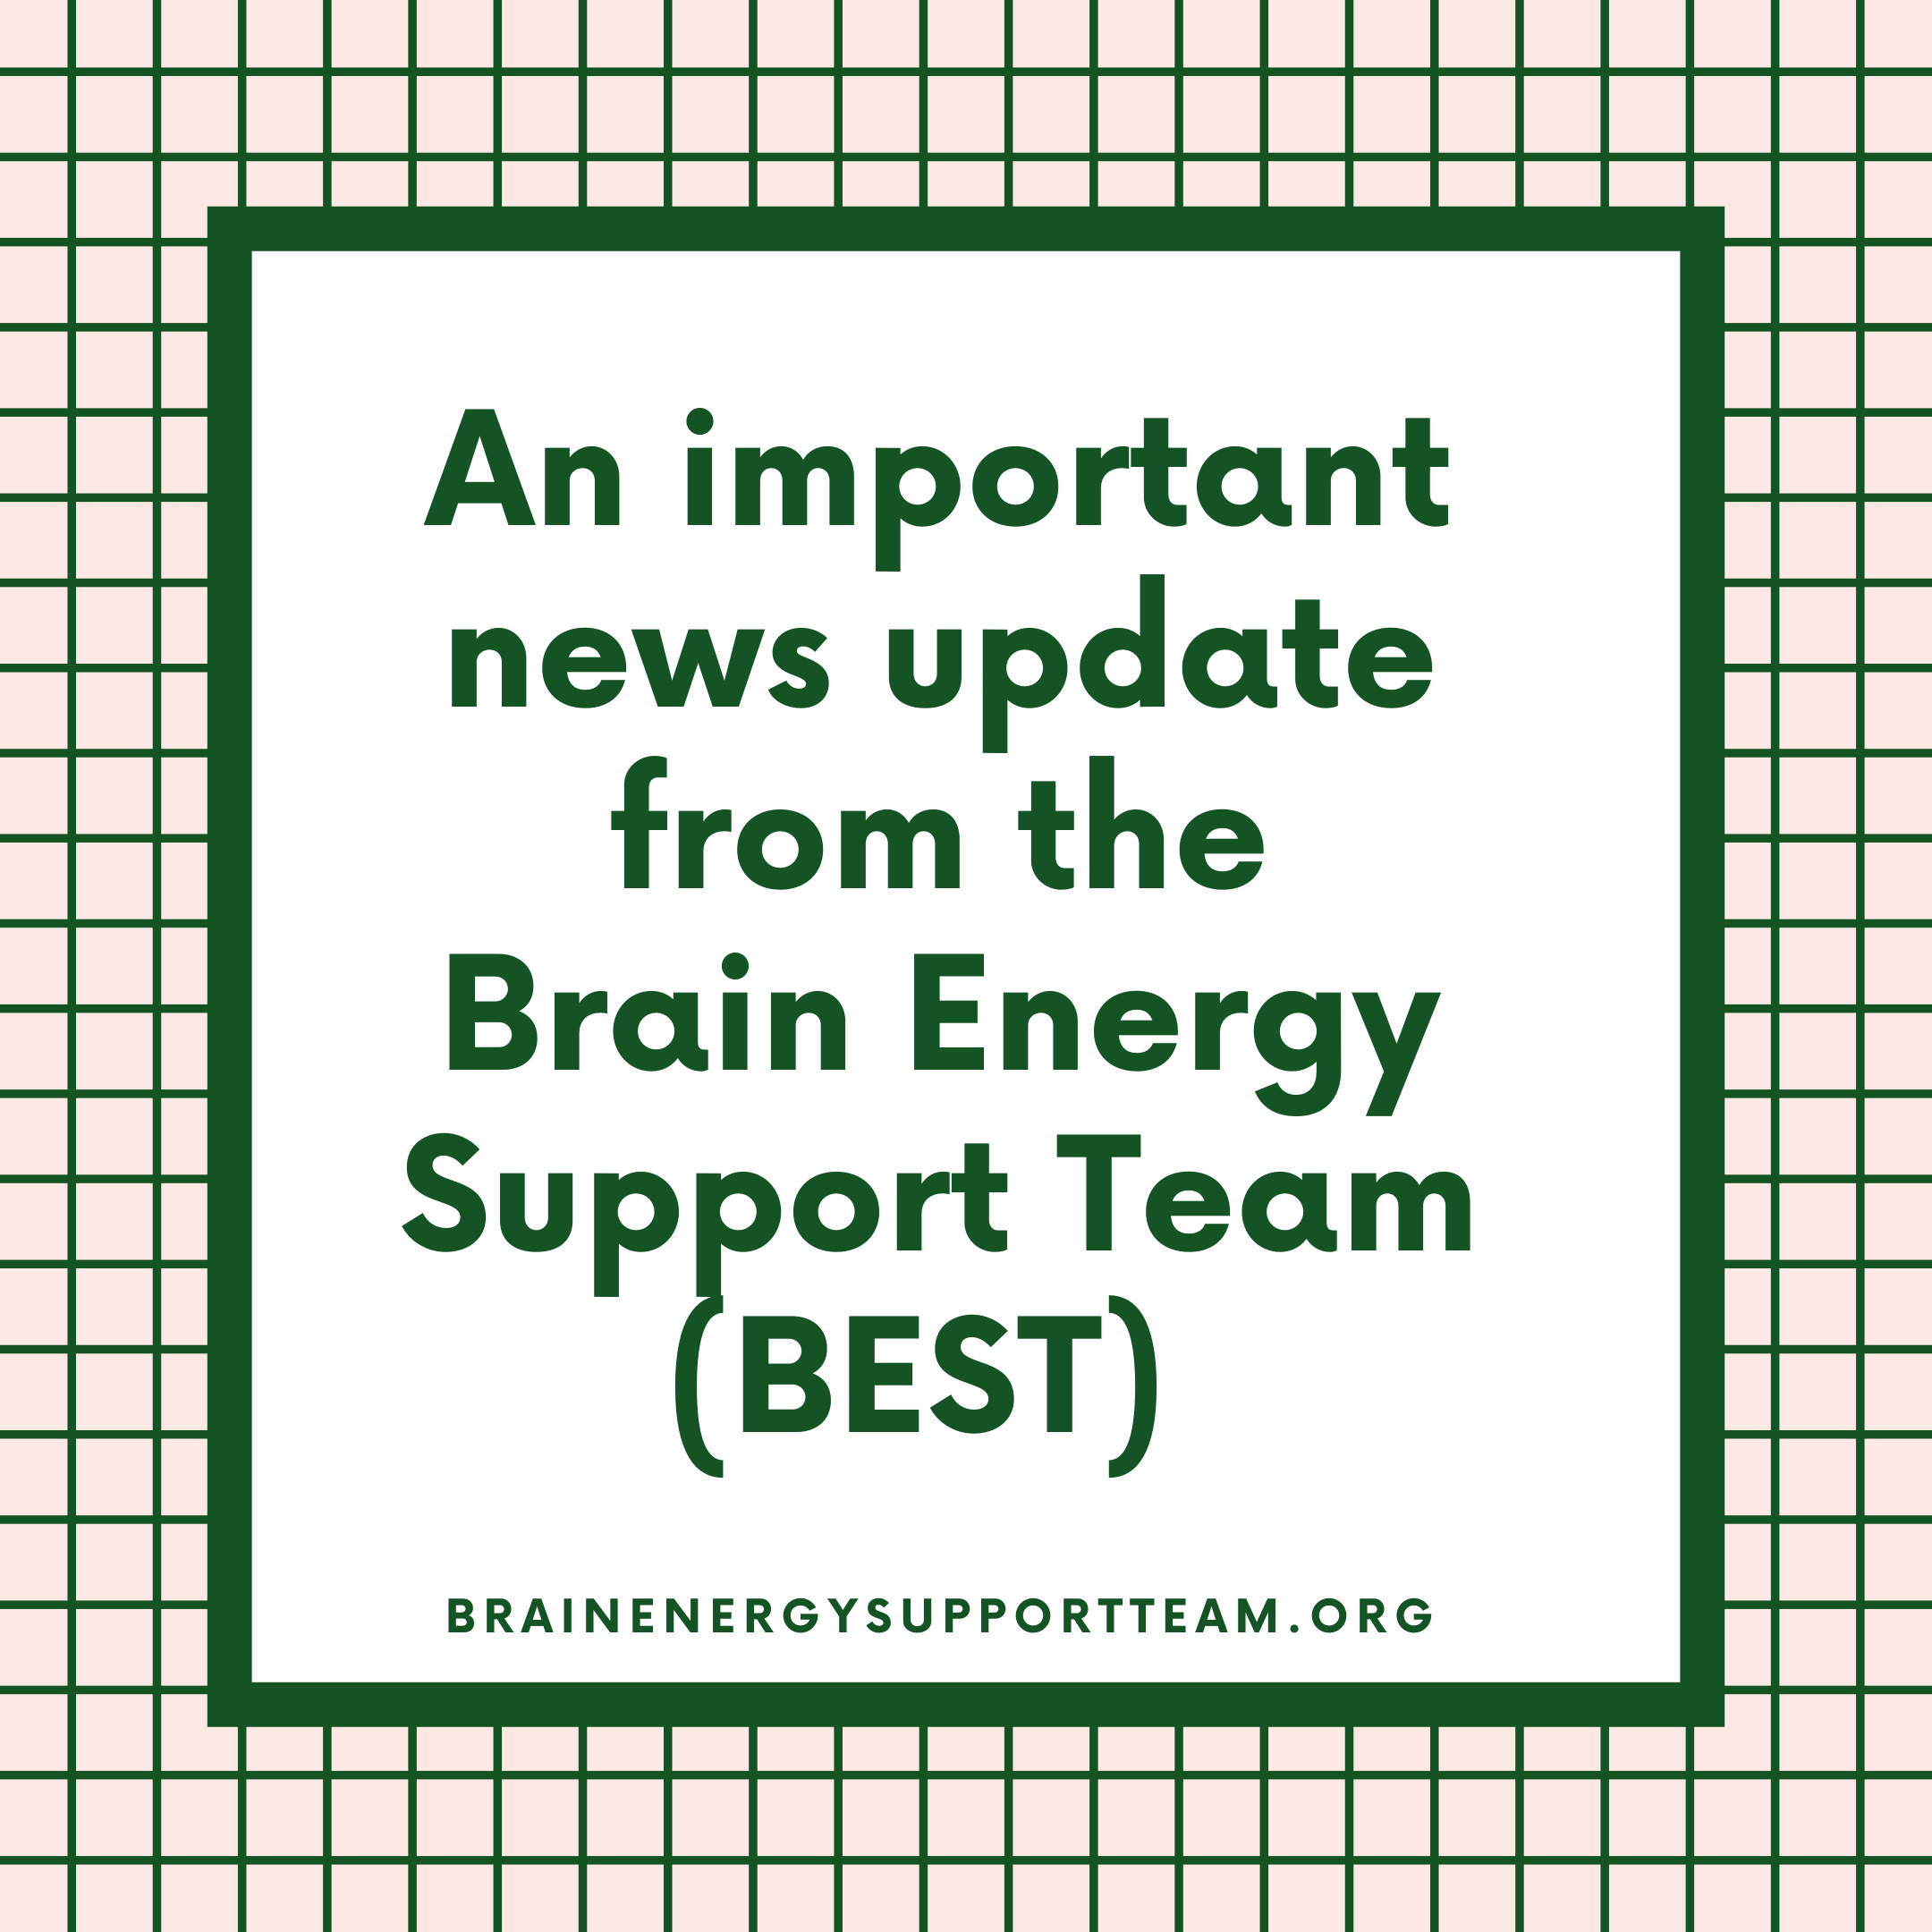 An important news update from the Brain Energy Support Team (BEST)